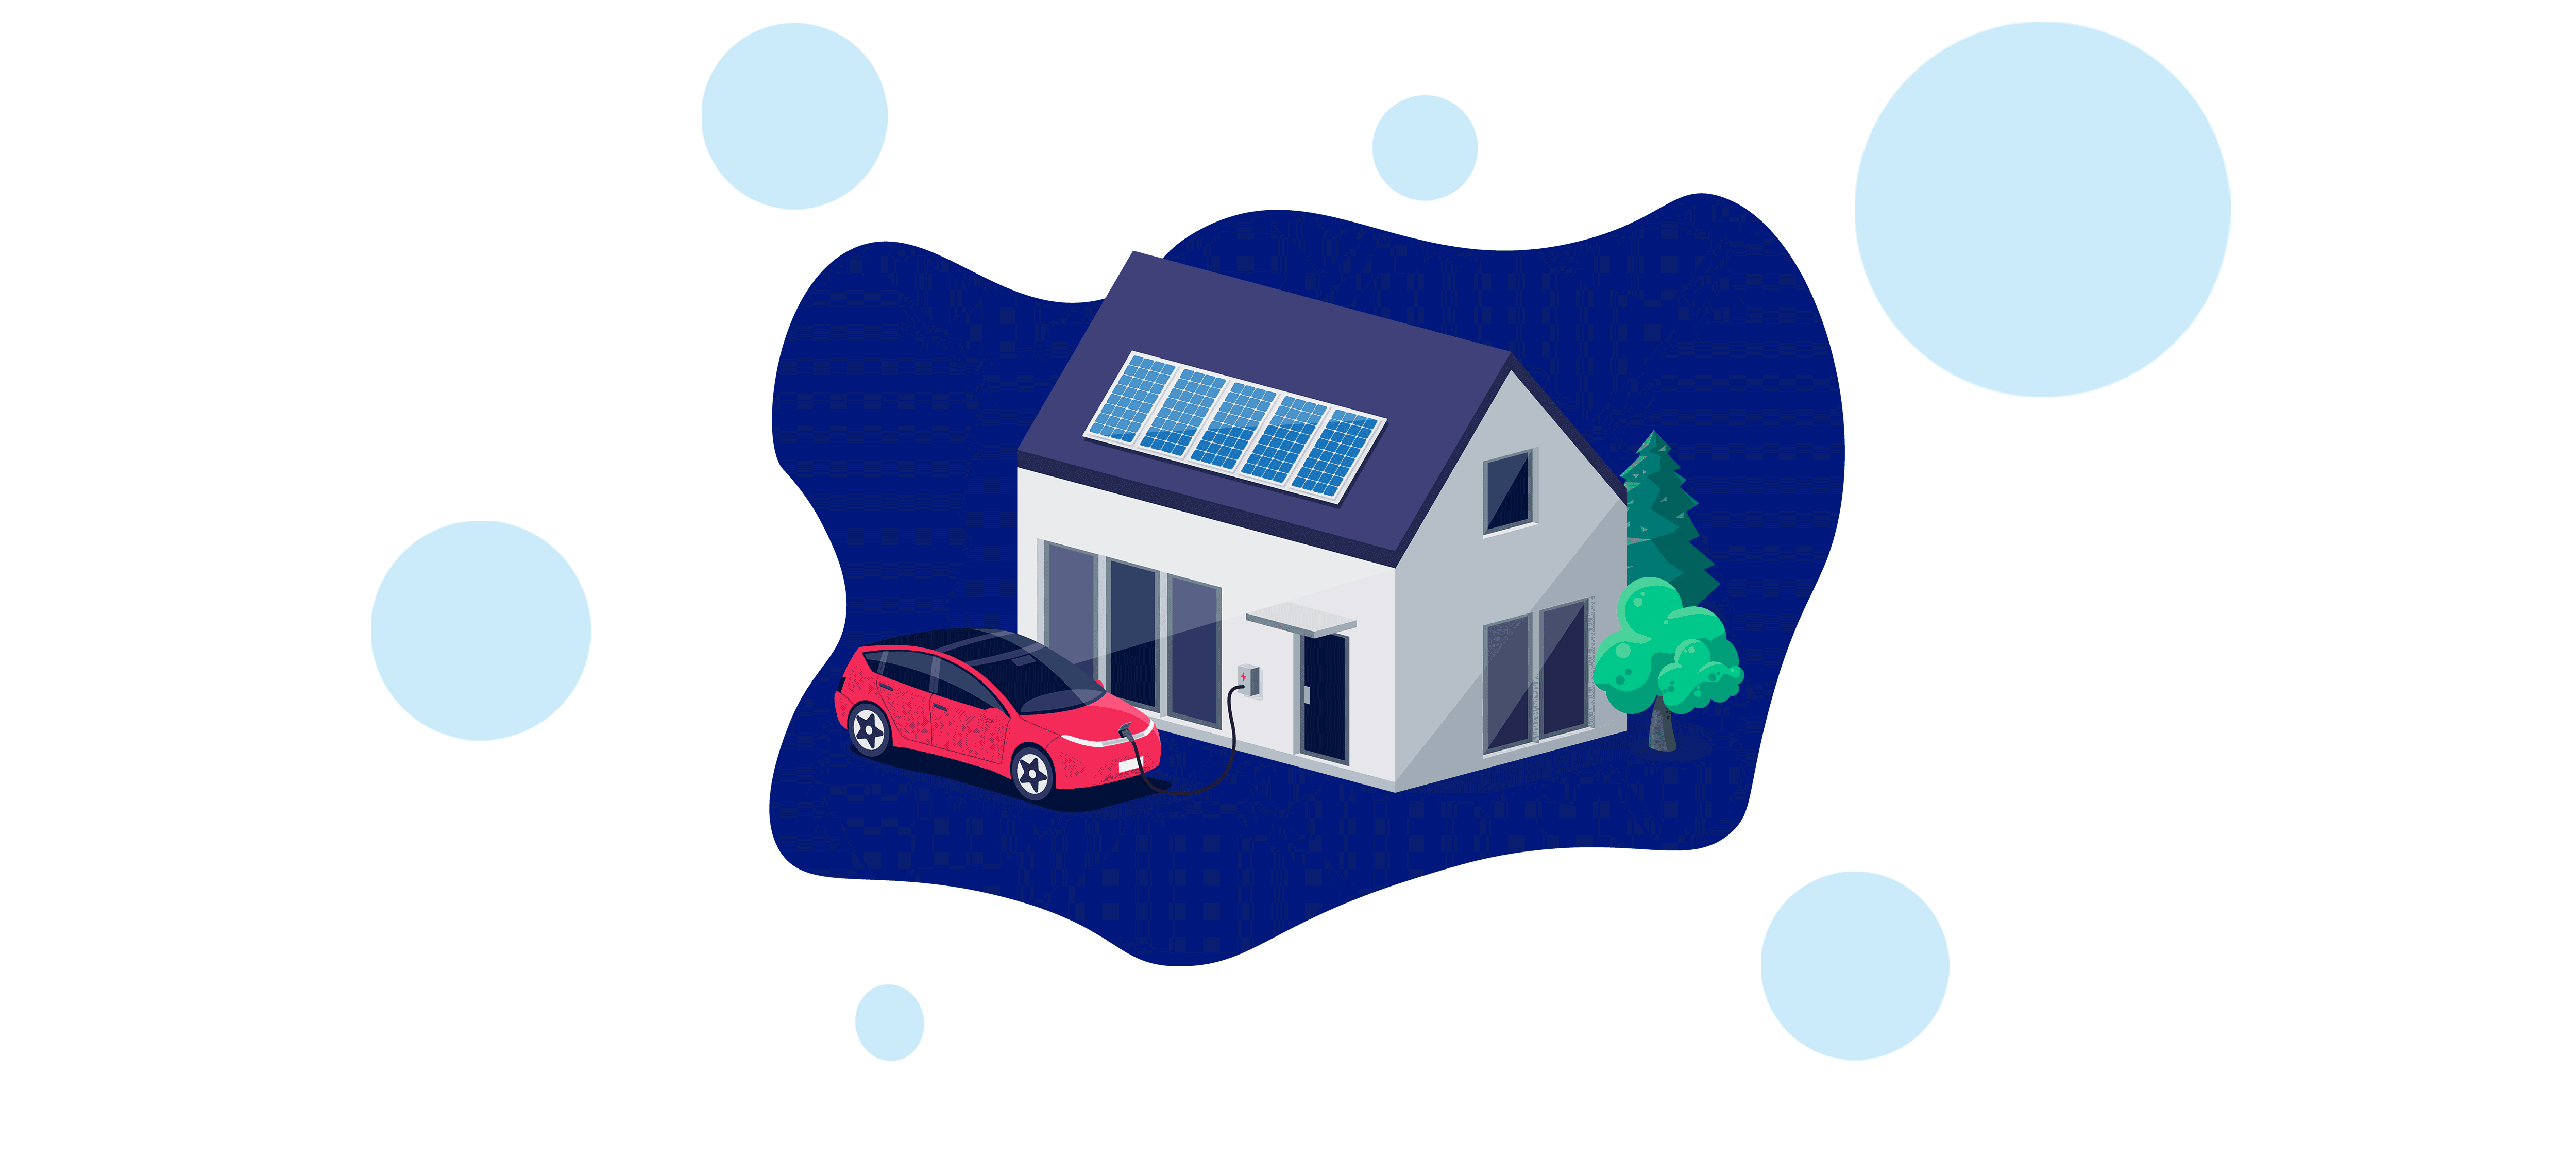 An illustration of an electric car charged with rooftop solar. The car is parked next to the house.